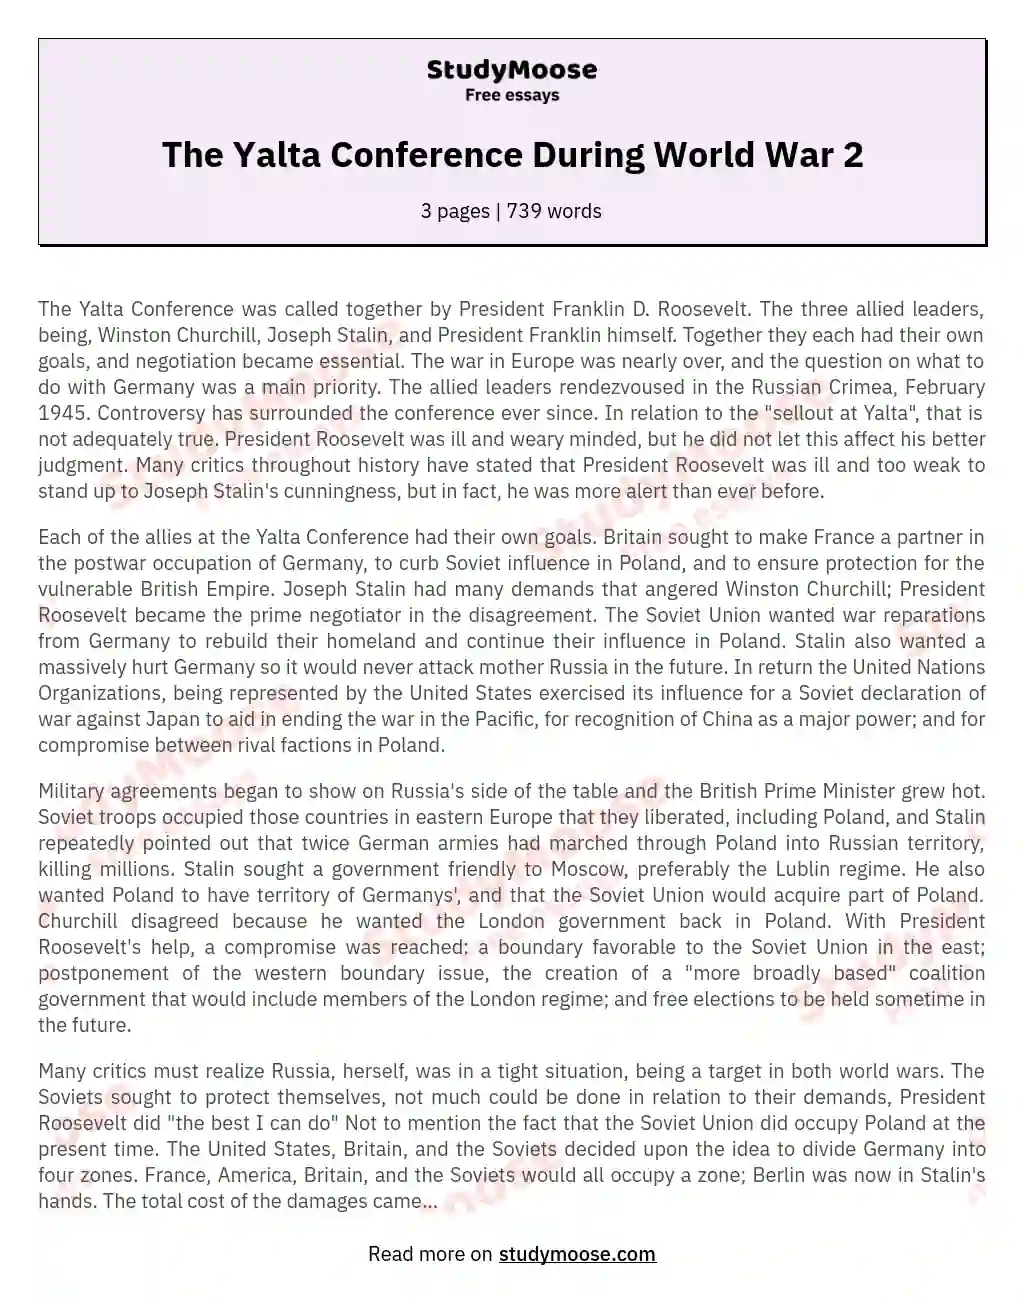 The Yalta Conference During World War 2 essay